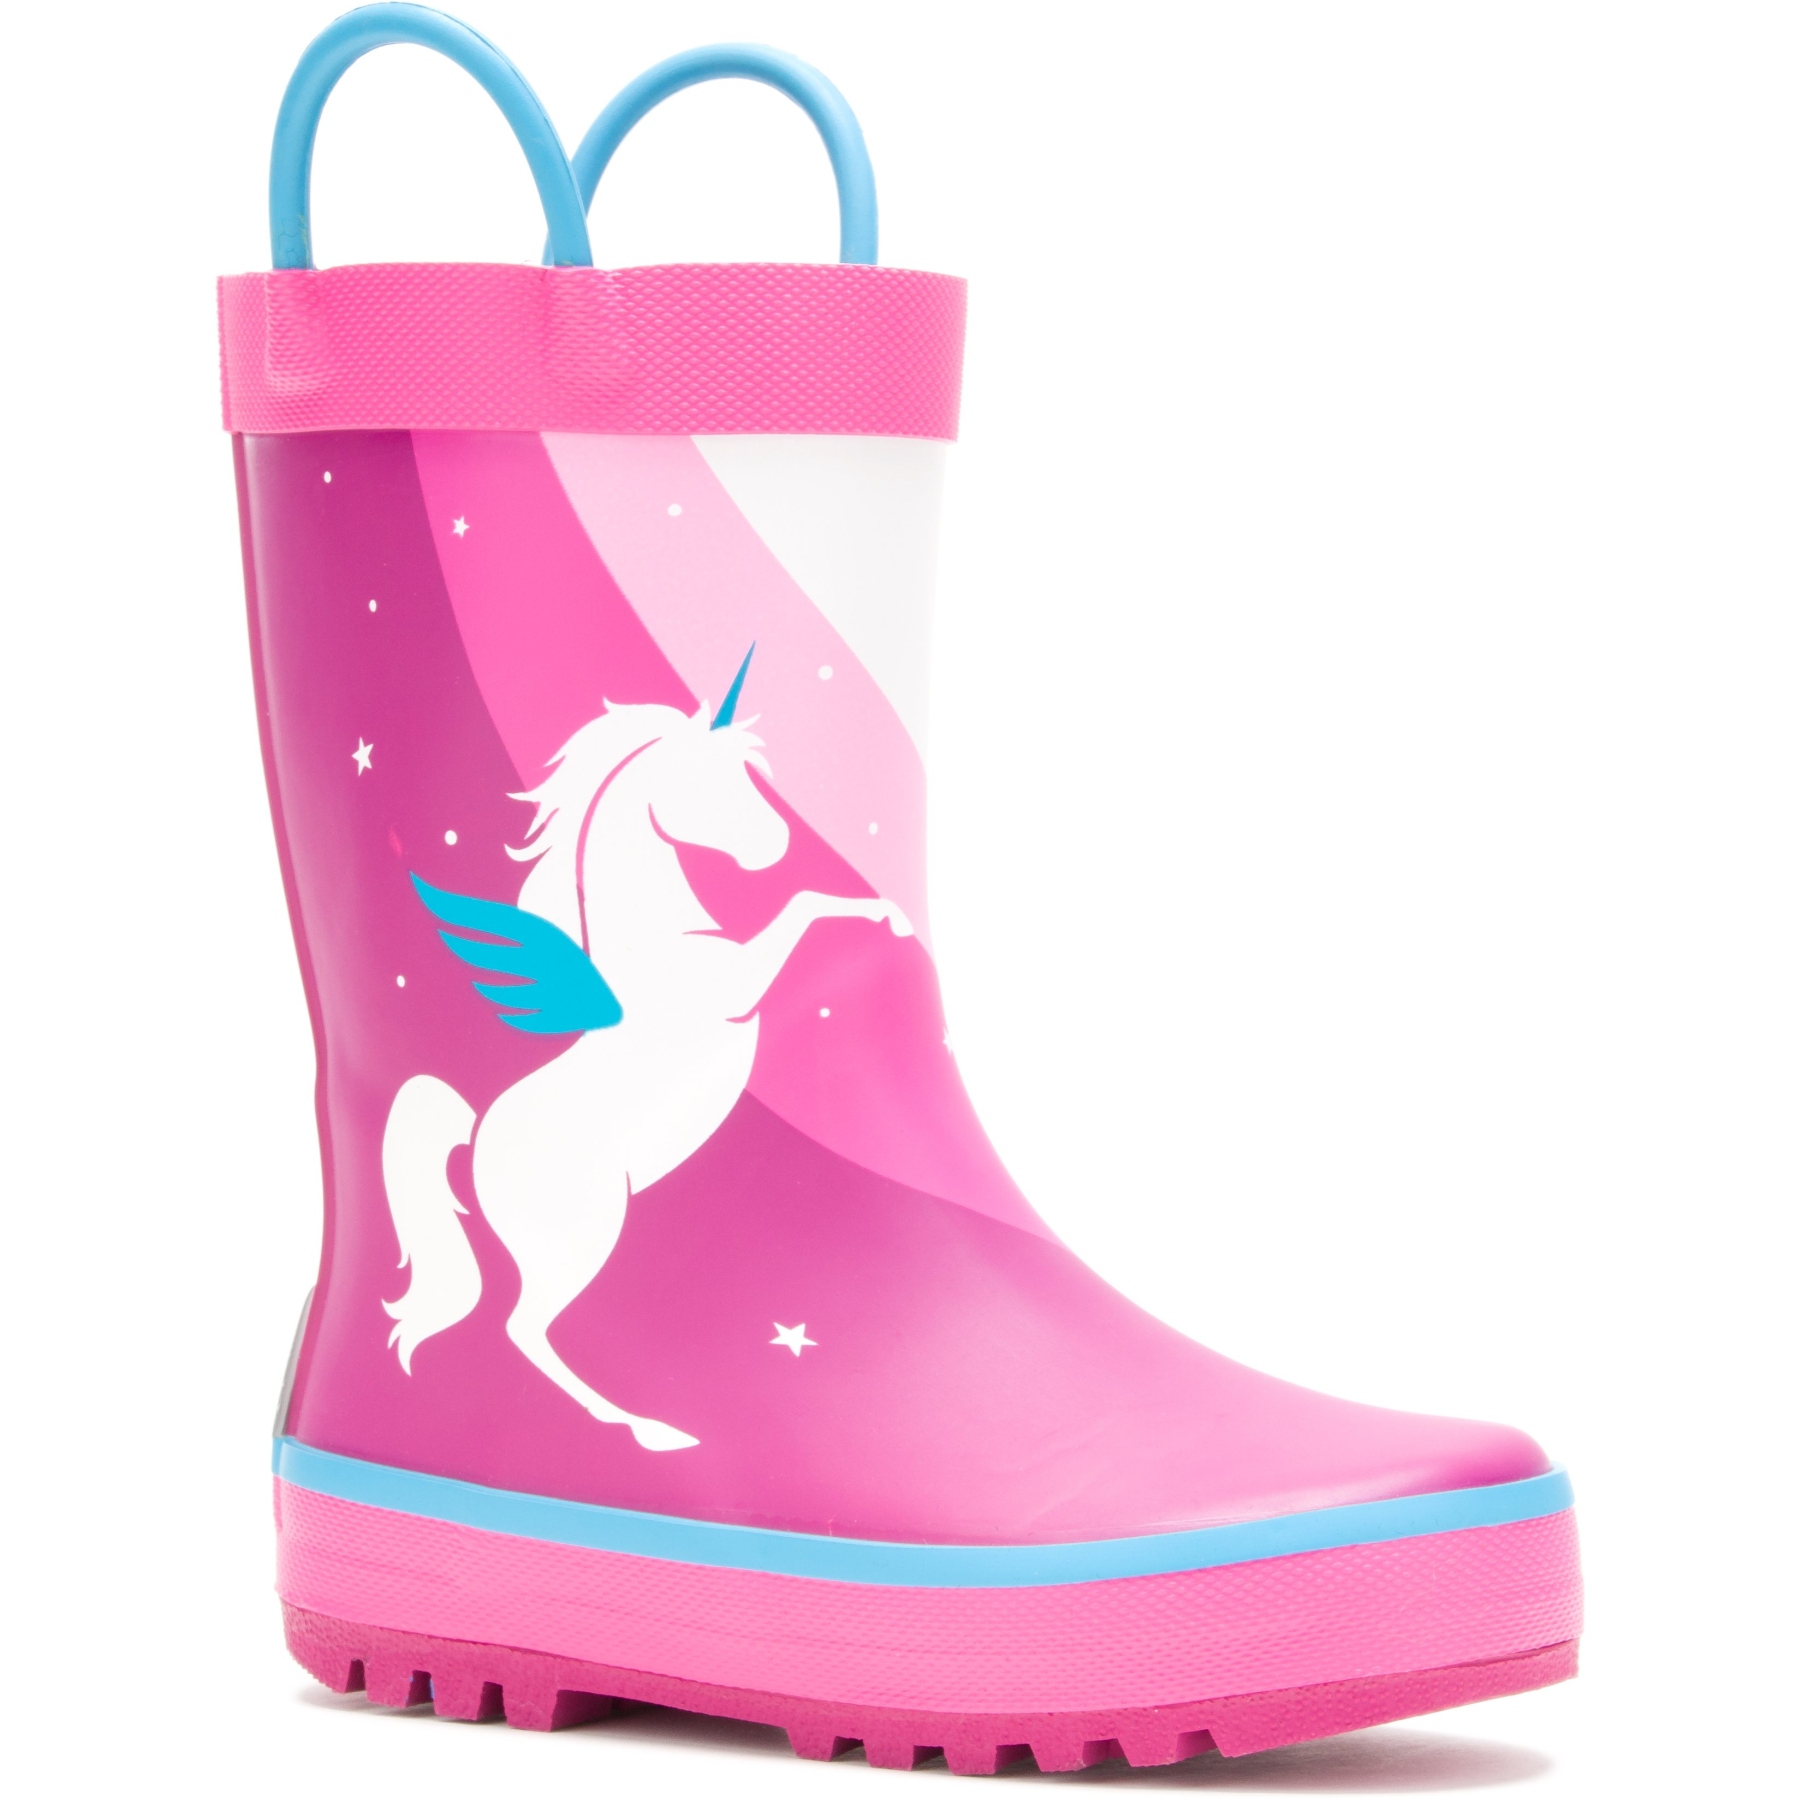 Picture of Kamik Unicorn Toddlers Rubber Boots - Magenta (Size 20-27)